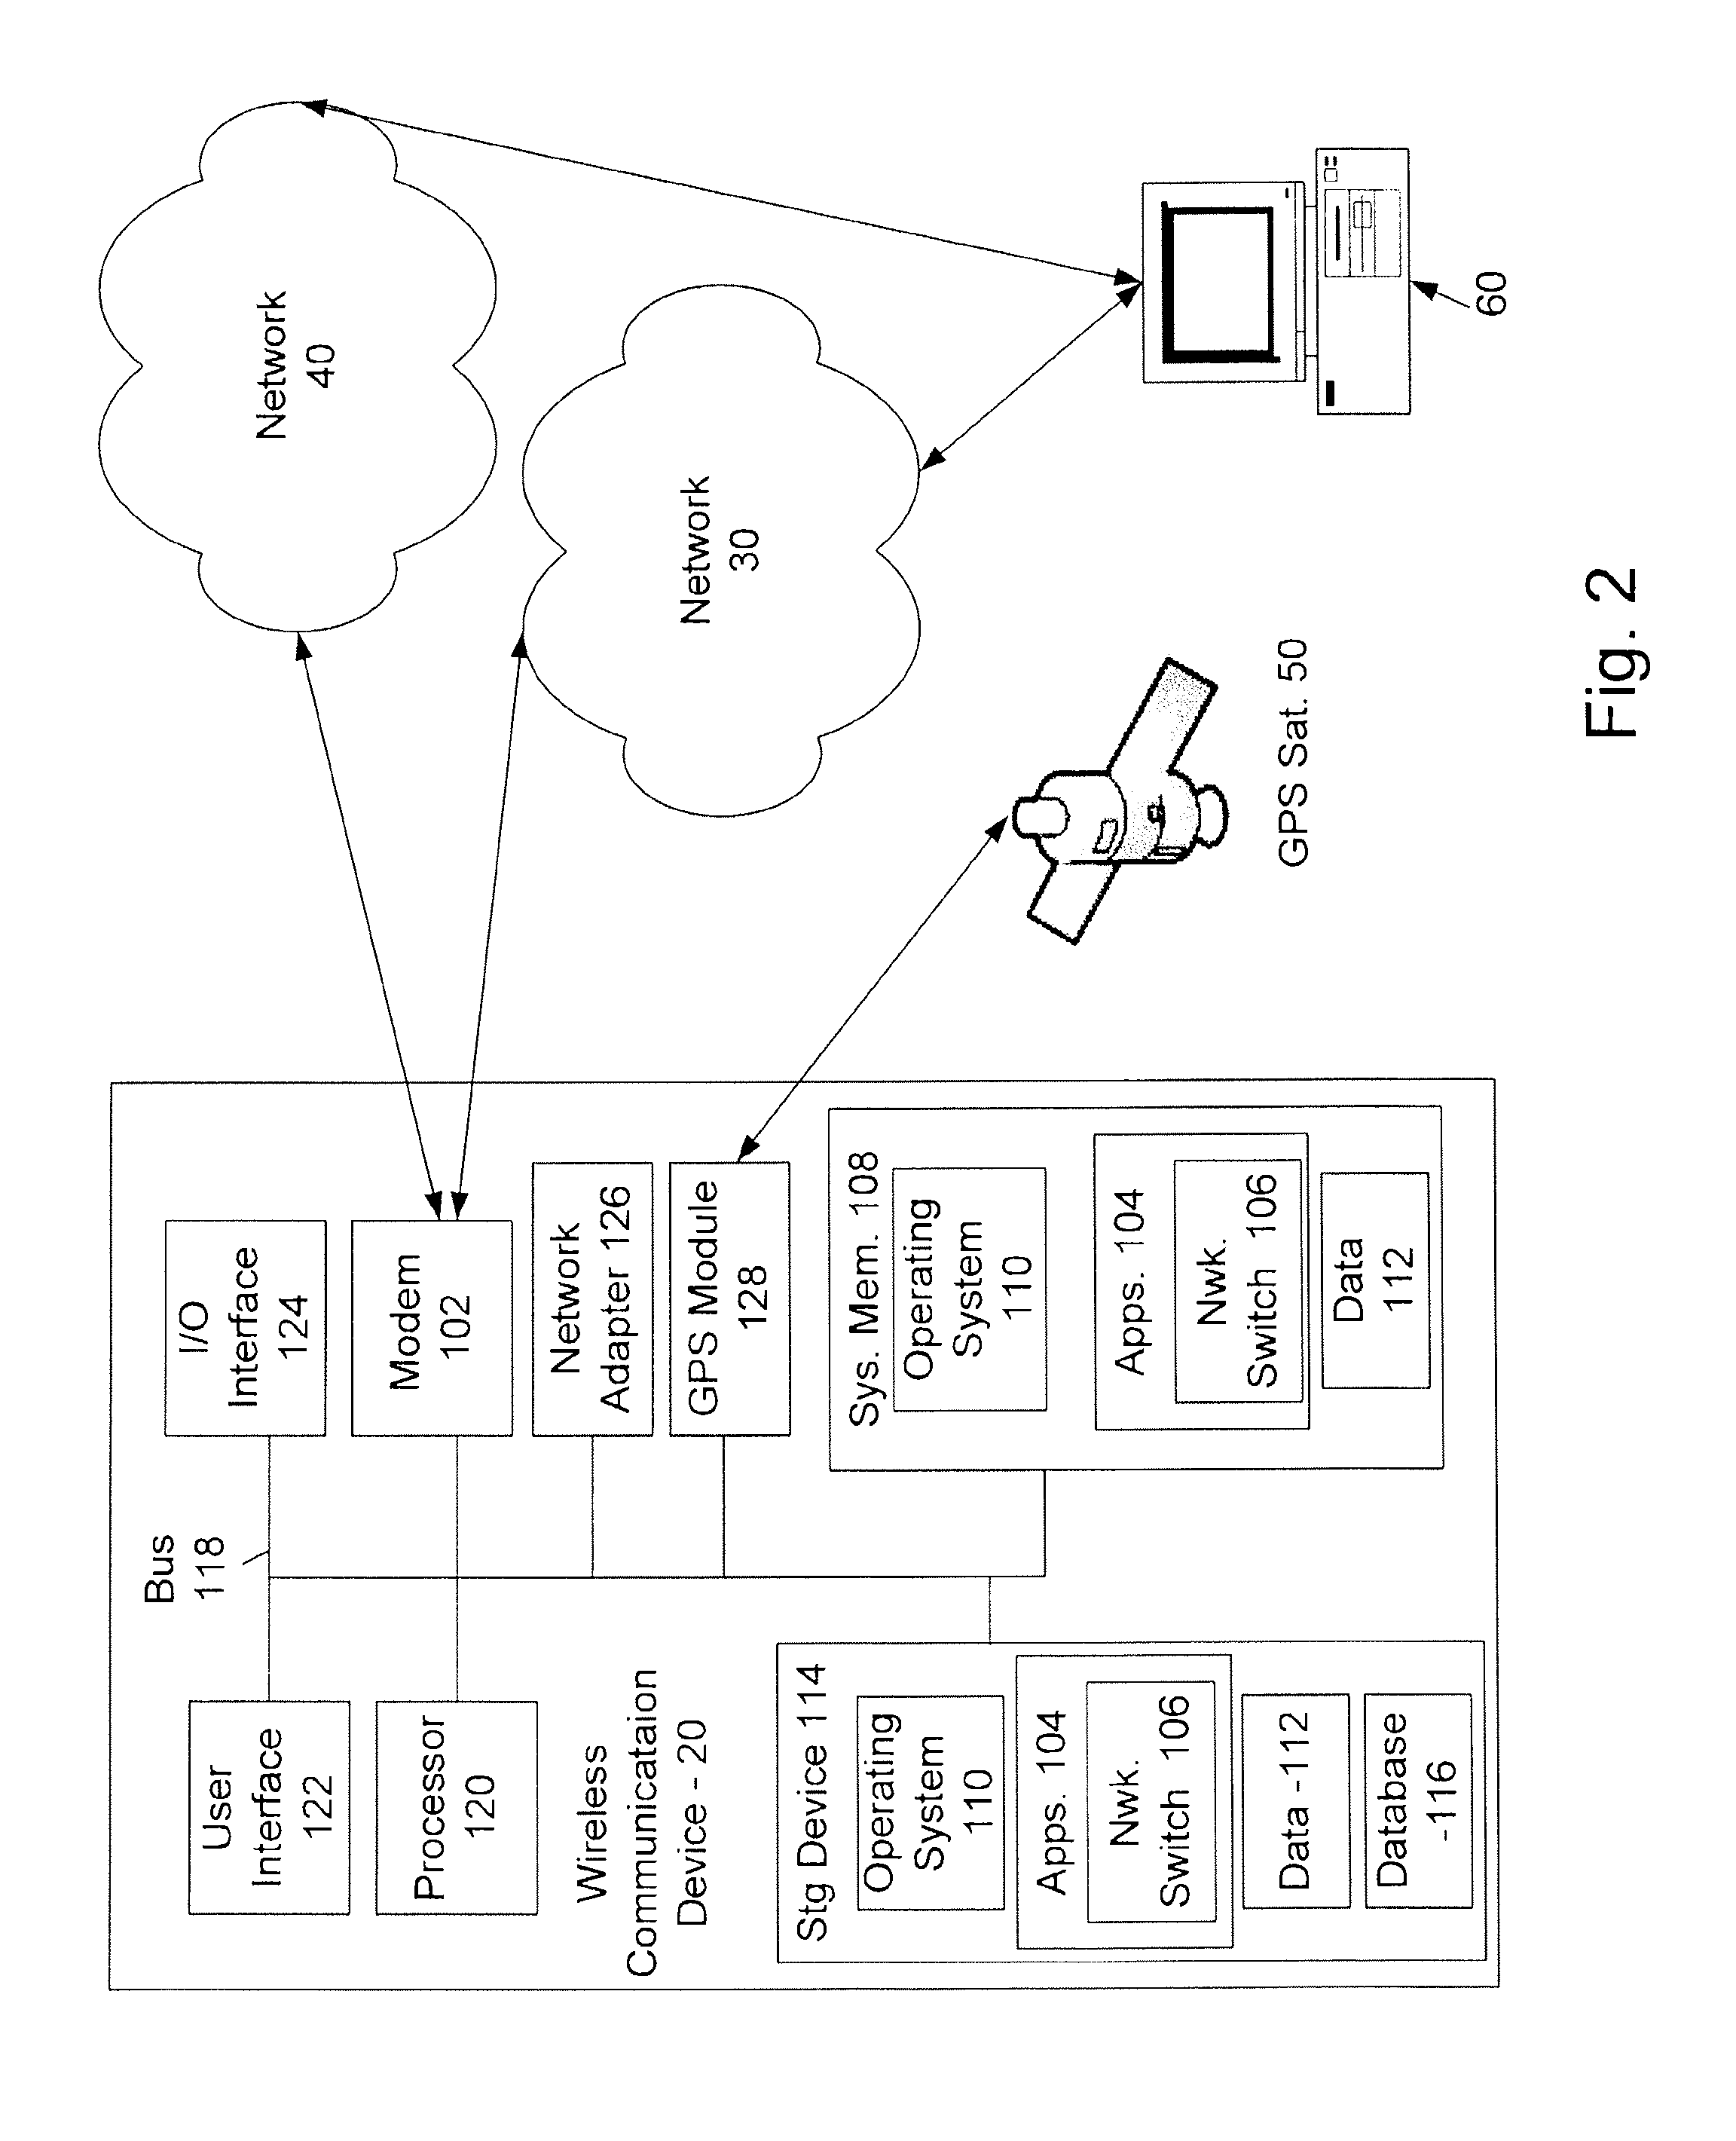 Method for switching from a first cellular network to a second cellular network